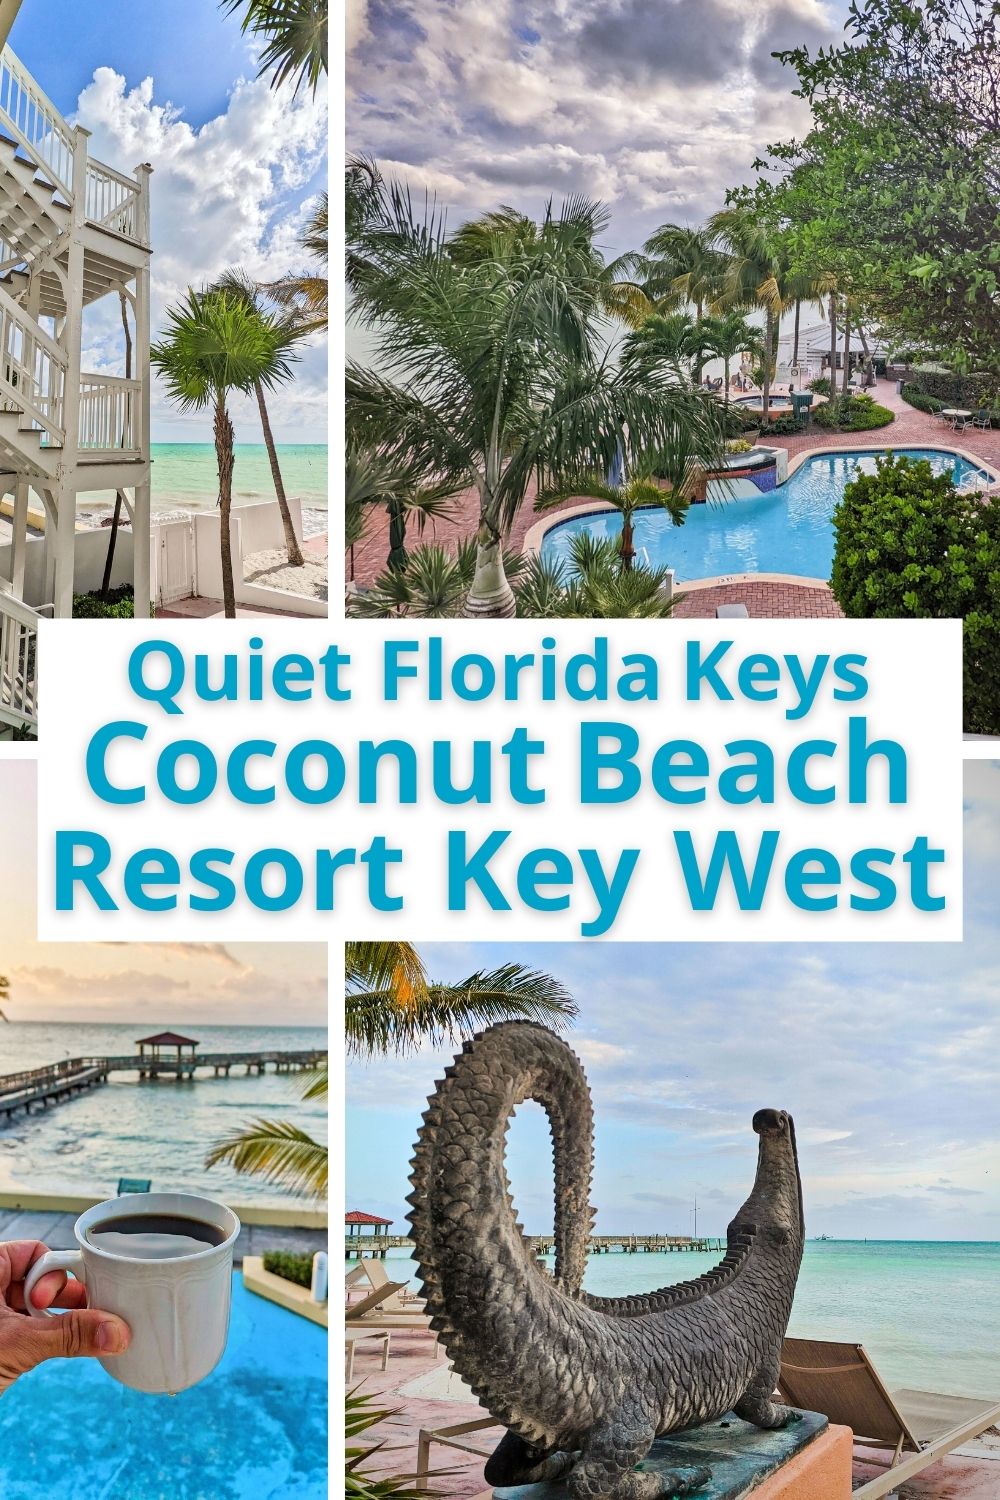 The Coconut Beach Resort Key West is the ideal hotel for anyone looking for an oceanfront suite, heated pool and perfect Key West views. Details of the hotel, things to do in the Southernmost Point area, and tips for a great Key West vacation.